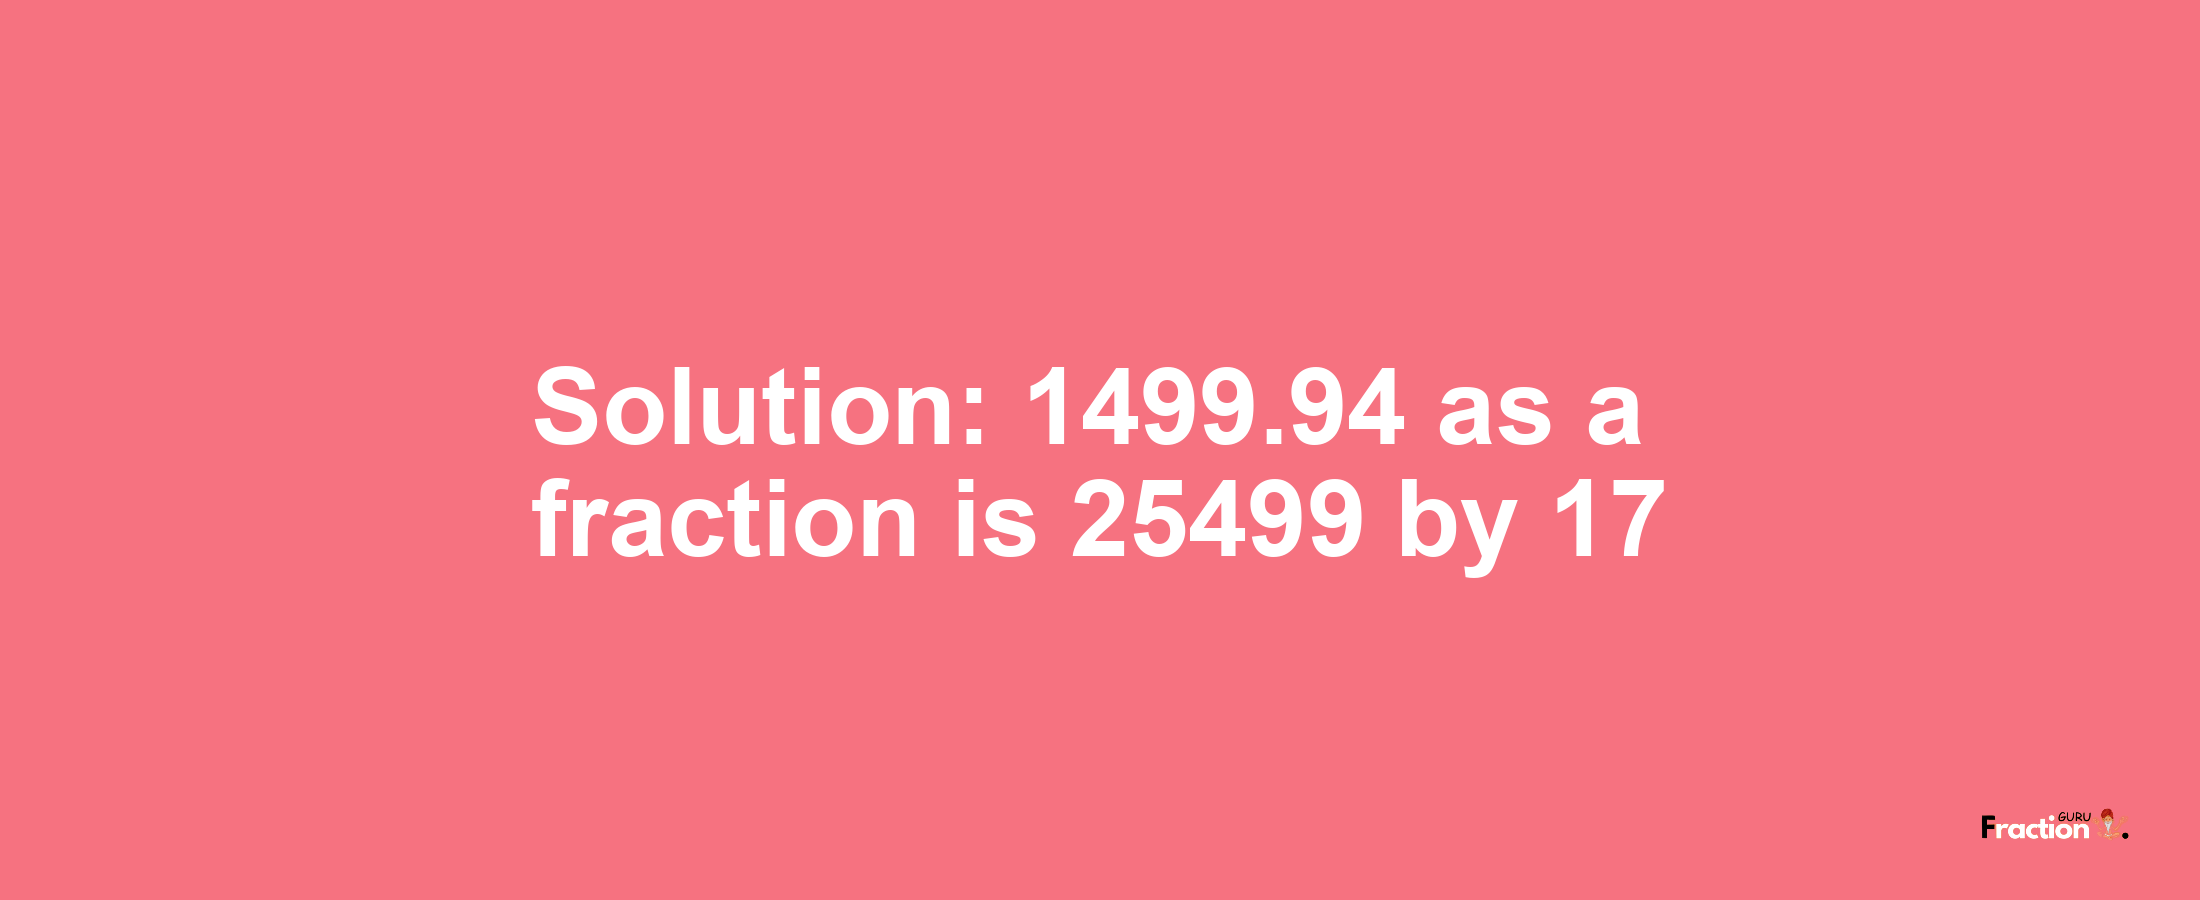 Solution:1499.94 as a fraction is 25499/17